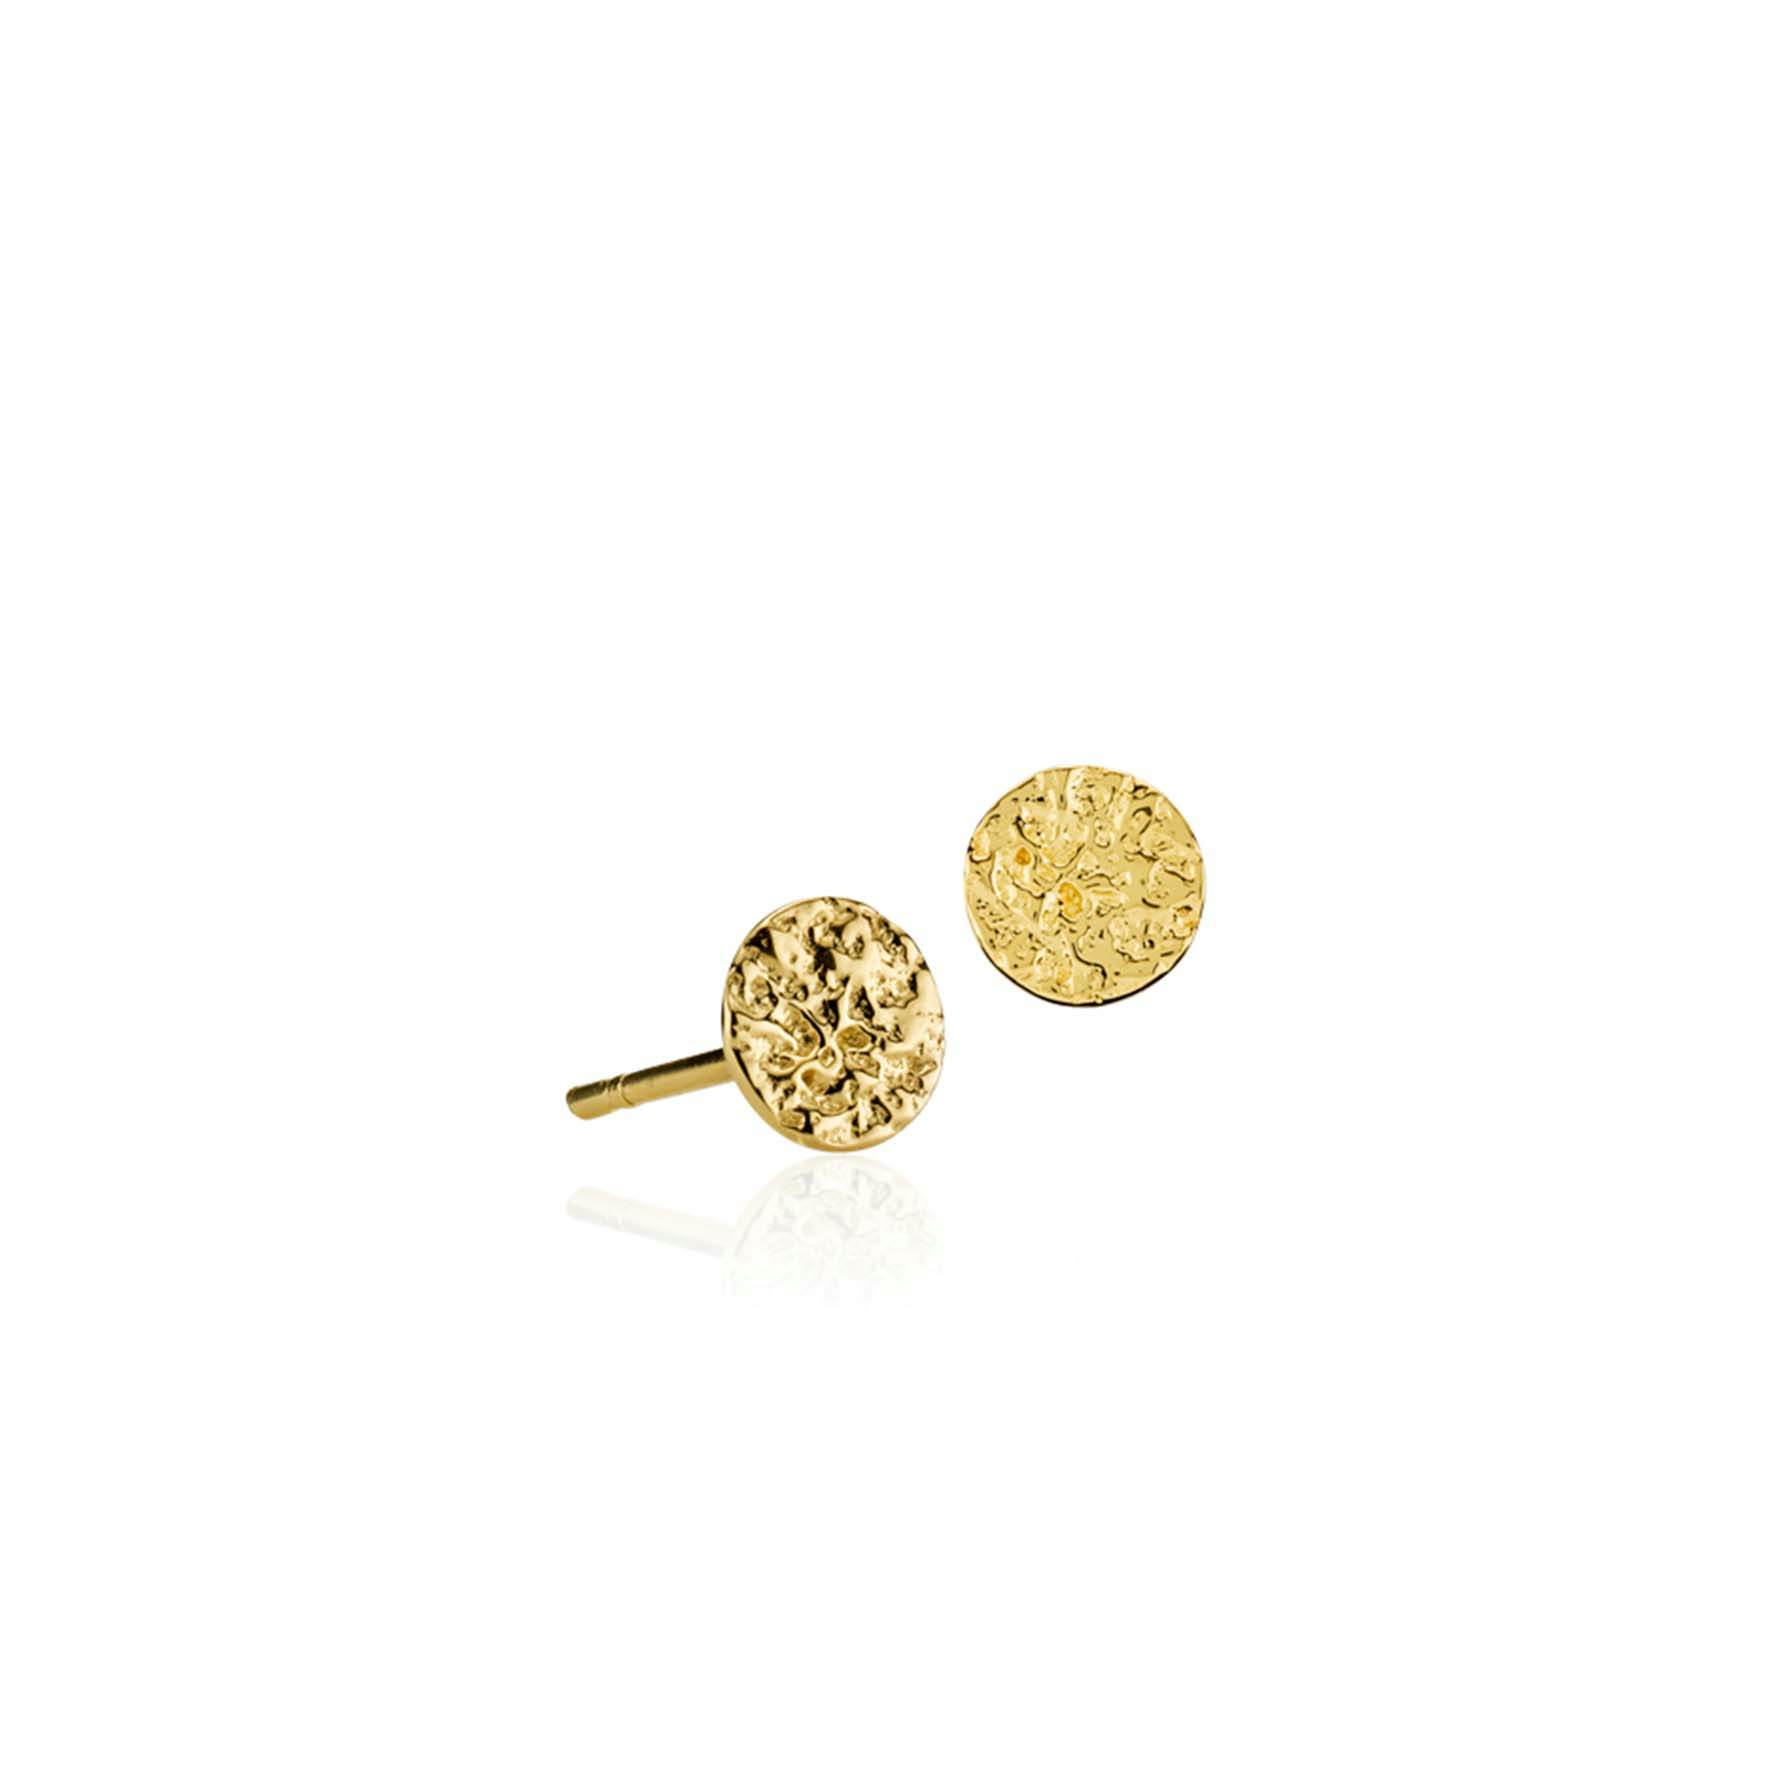 Hanna Martine by Sistie Earsticks from Sistie in Goldplated-Silver Sterling 925